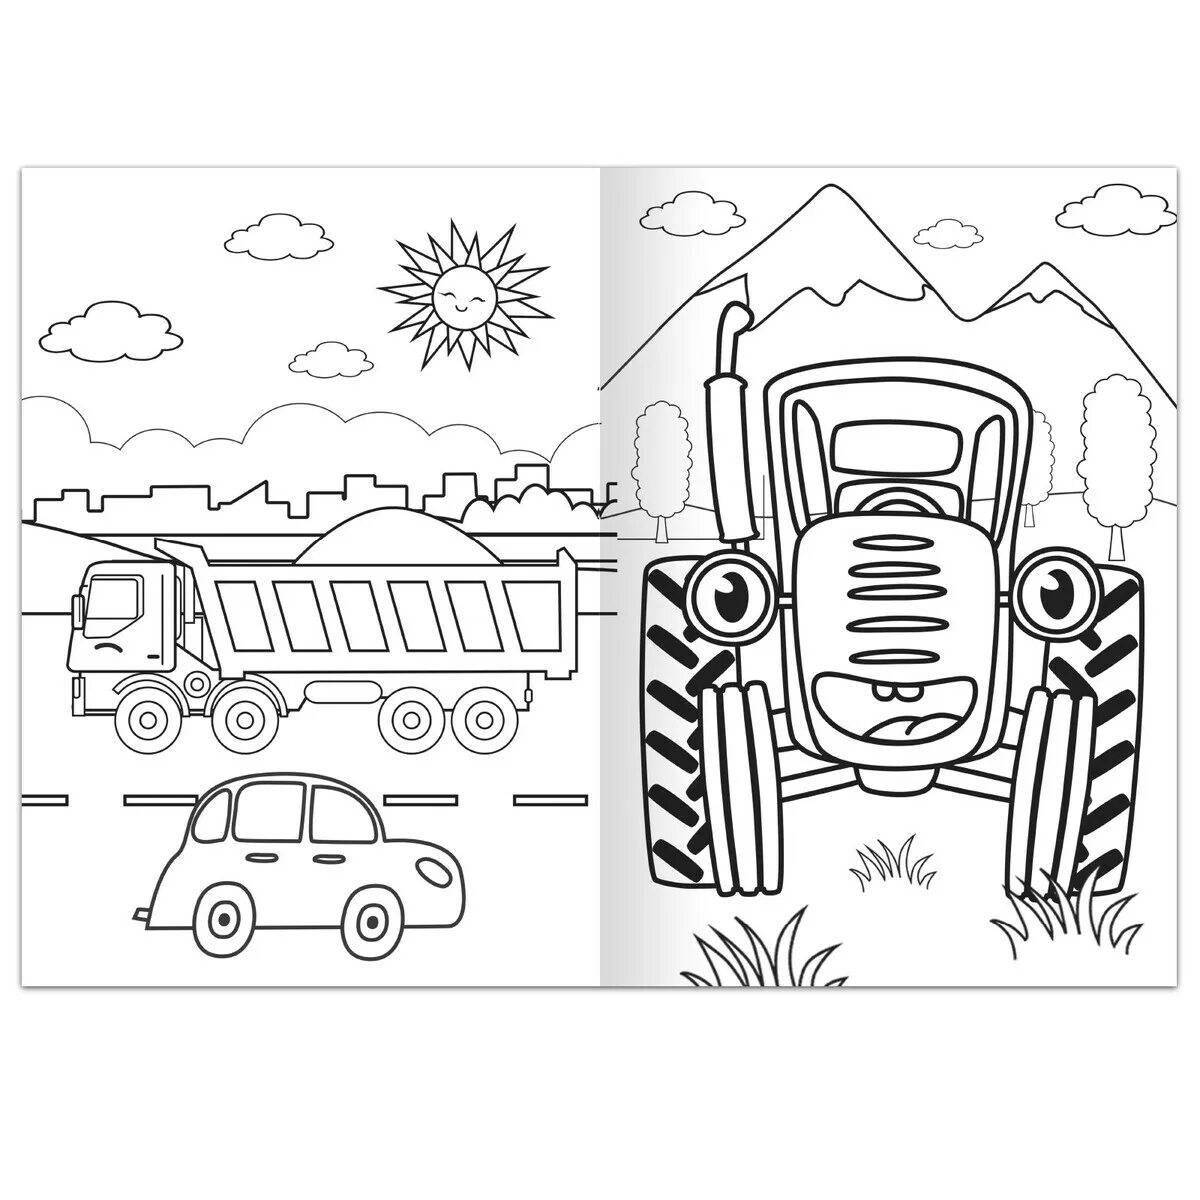 Flawless blue tractor coloring pages for kids